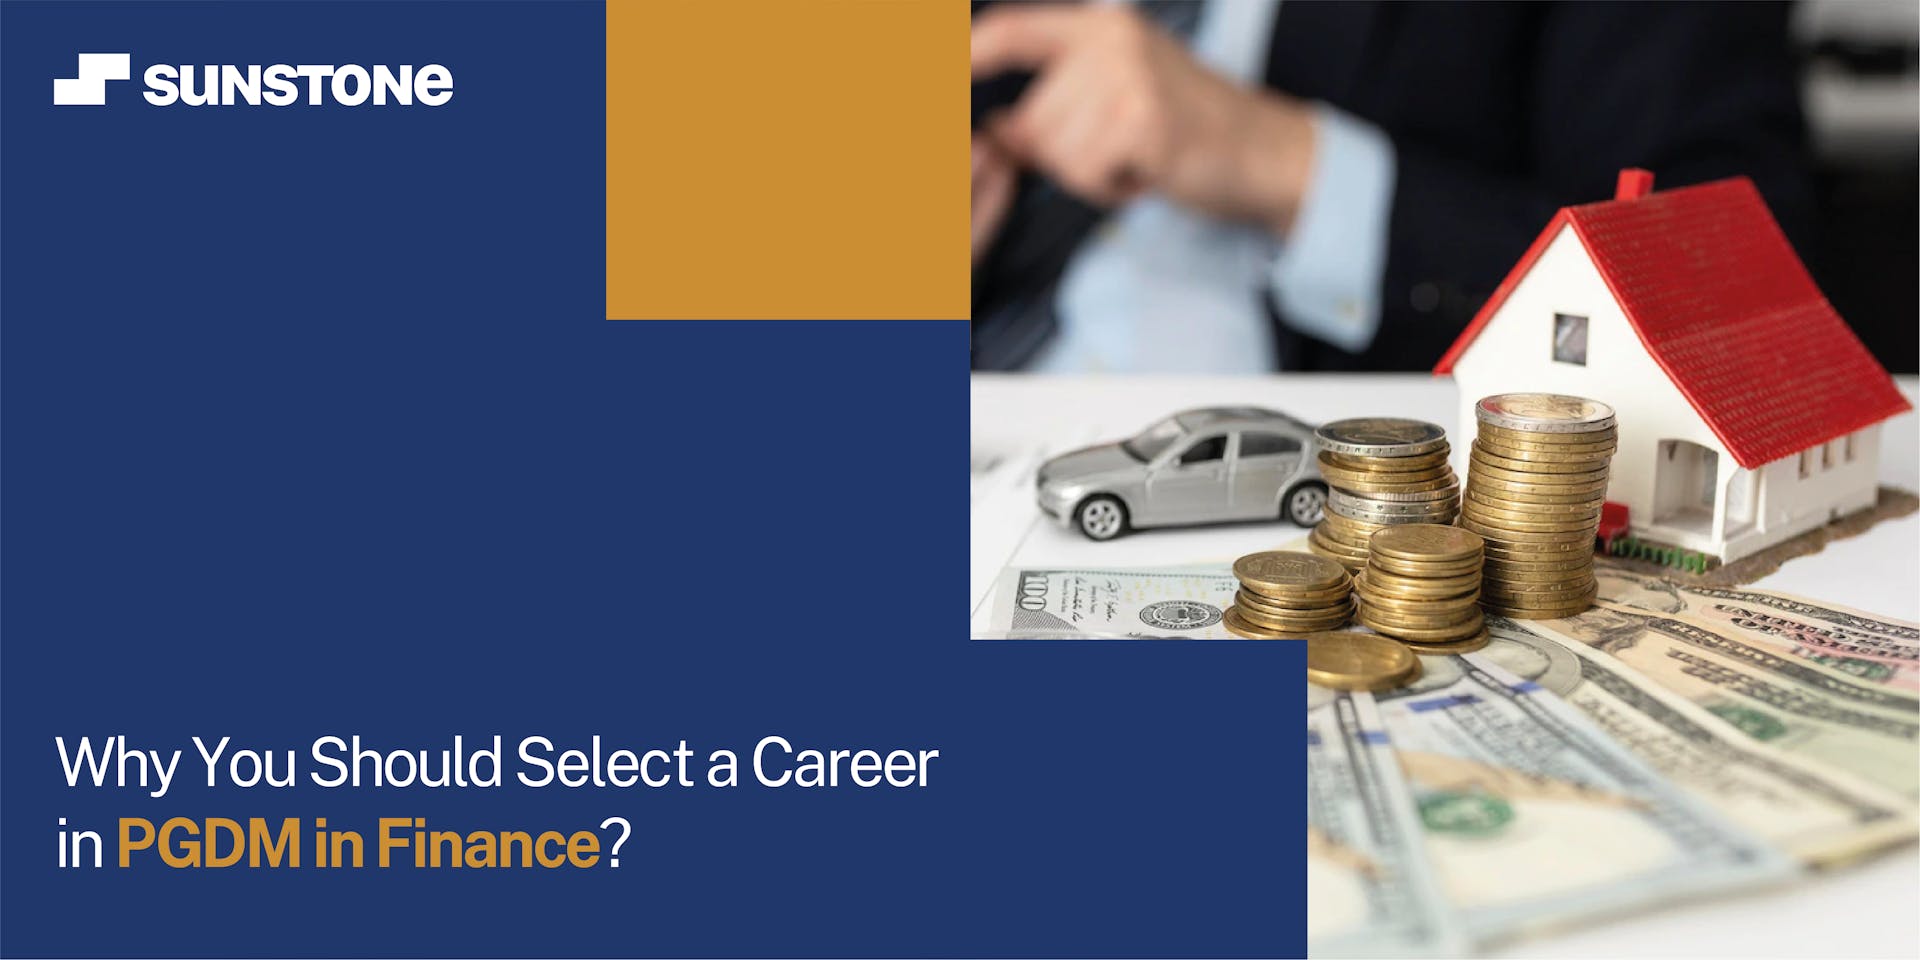 Why You Should Select a Career in PGDM in Finance?